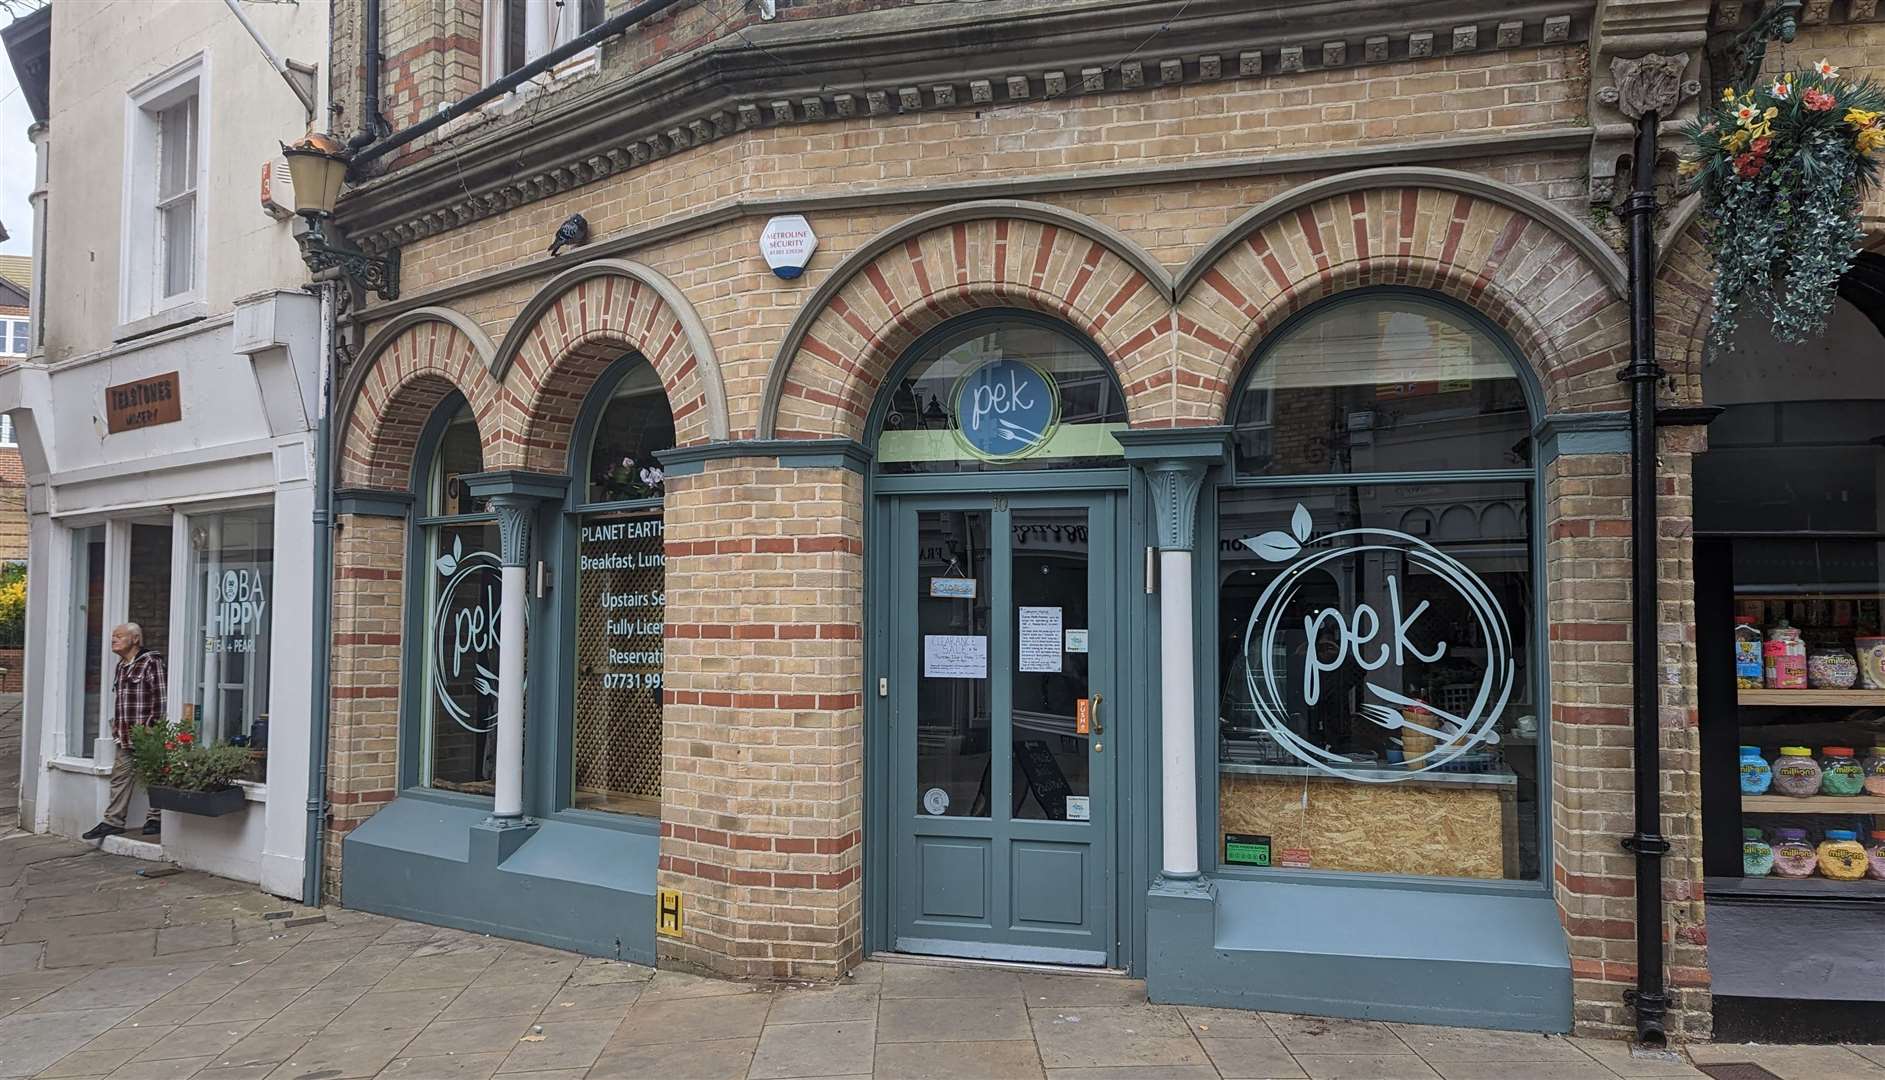 Planet Earth Kitchen in Rendezvous Street closed earlier this month